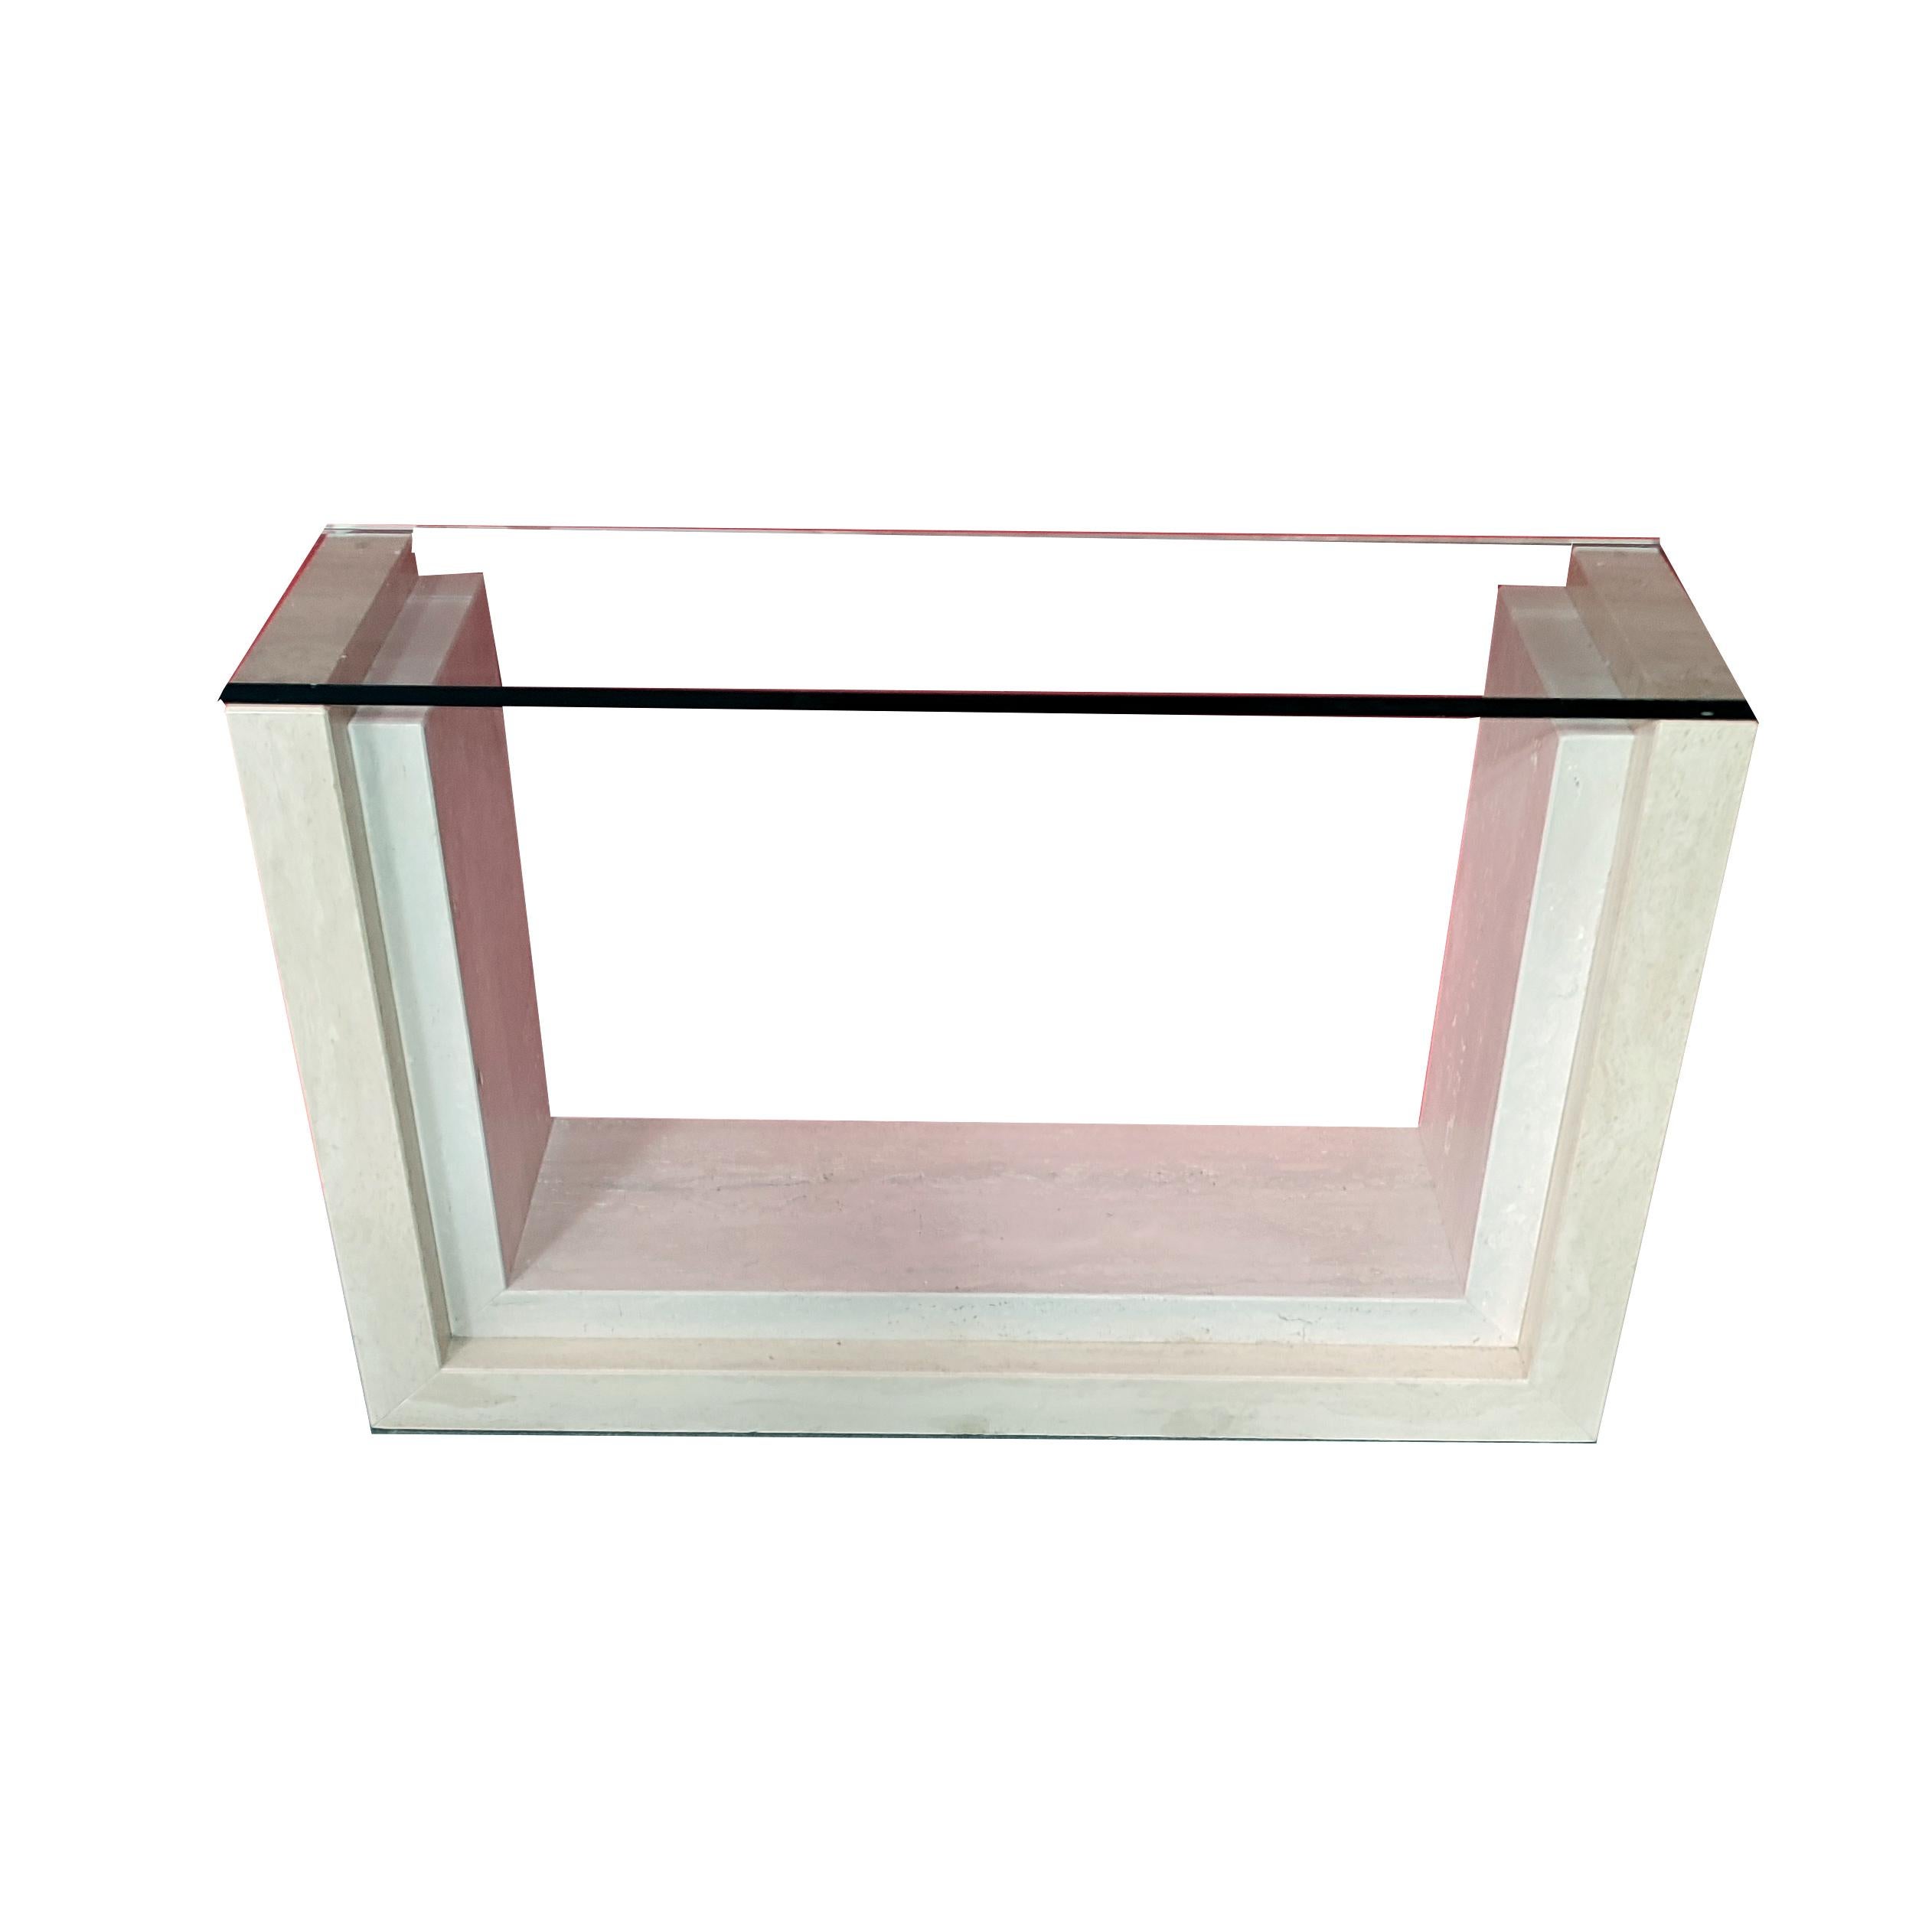 Spanish Feles Marble Travertine Console Table Natural & Matte Travertine in Stock Meddel For Sale